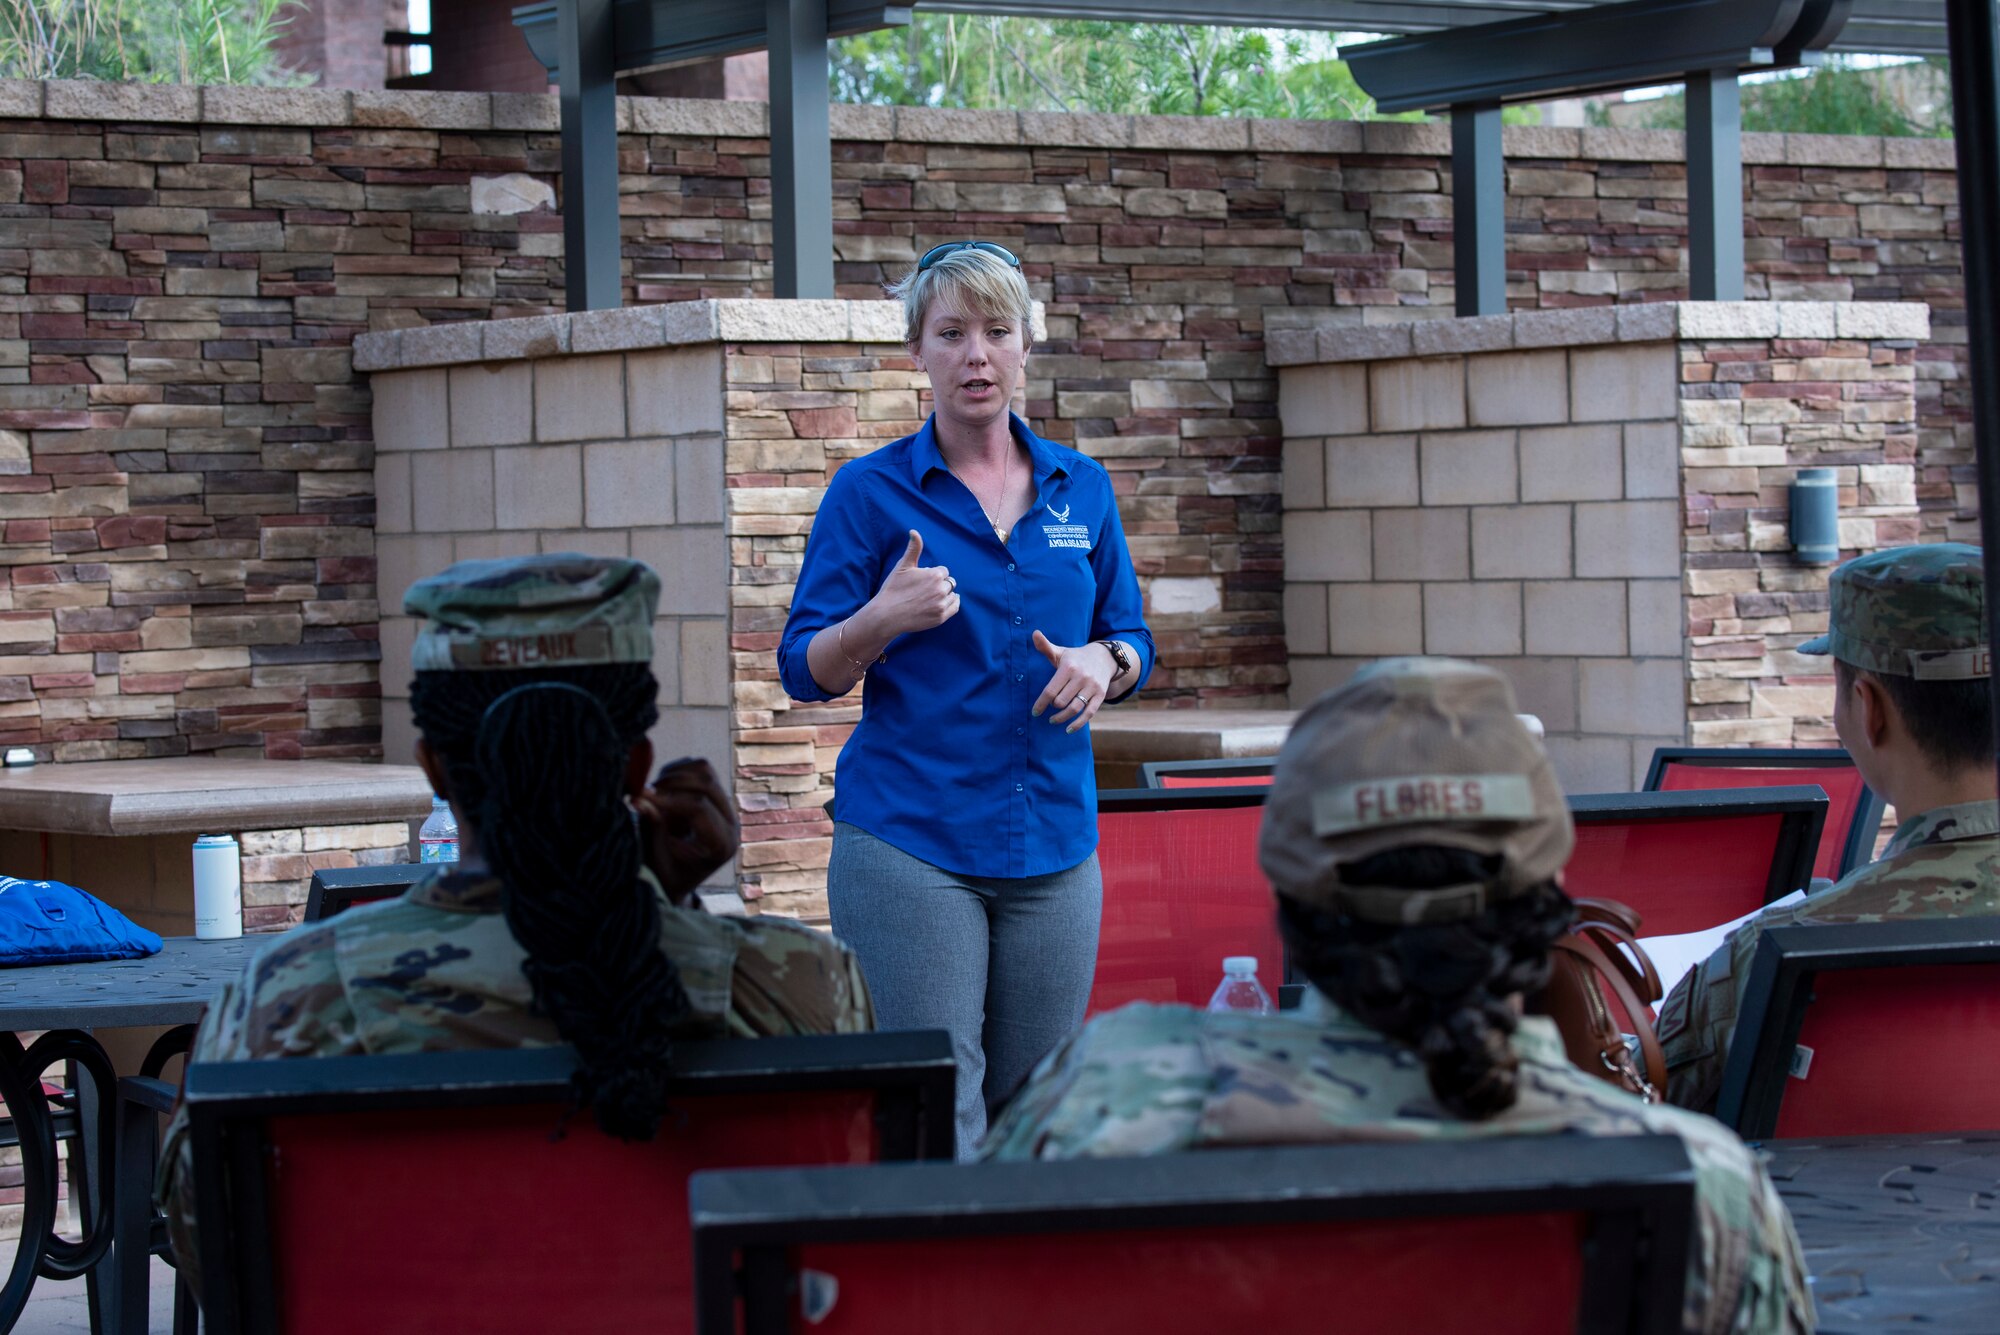 A women in a blue shirt expresses herself to a group of Airmen wearing ocps.